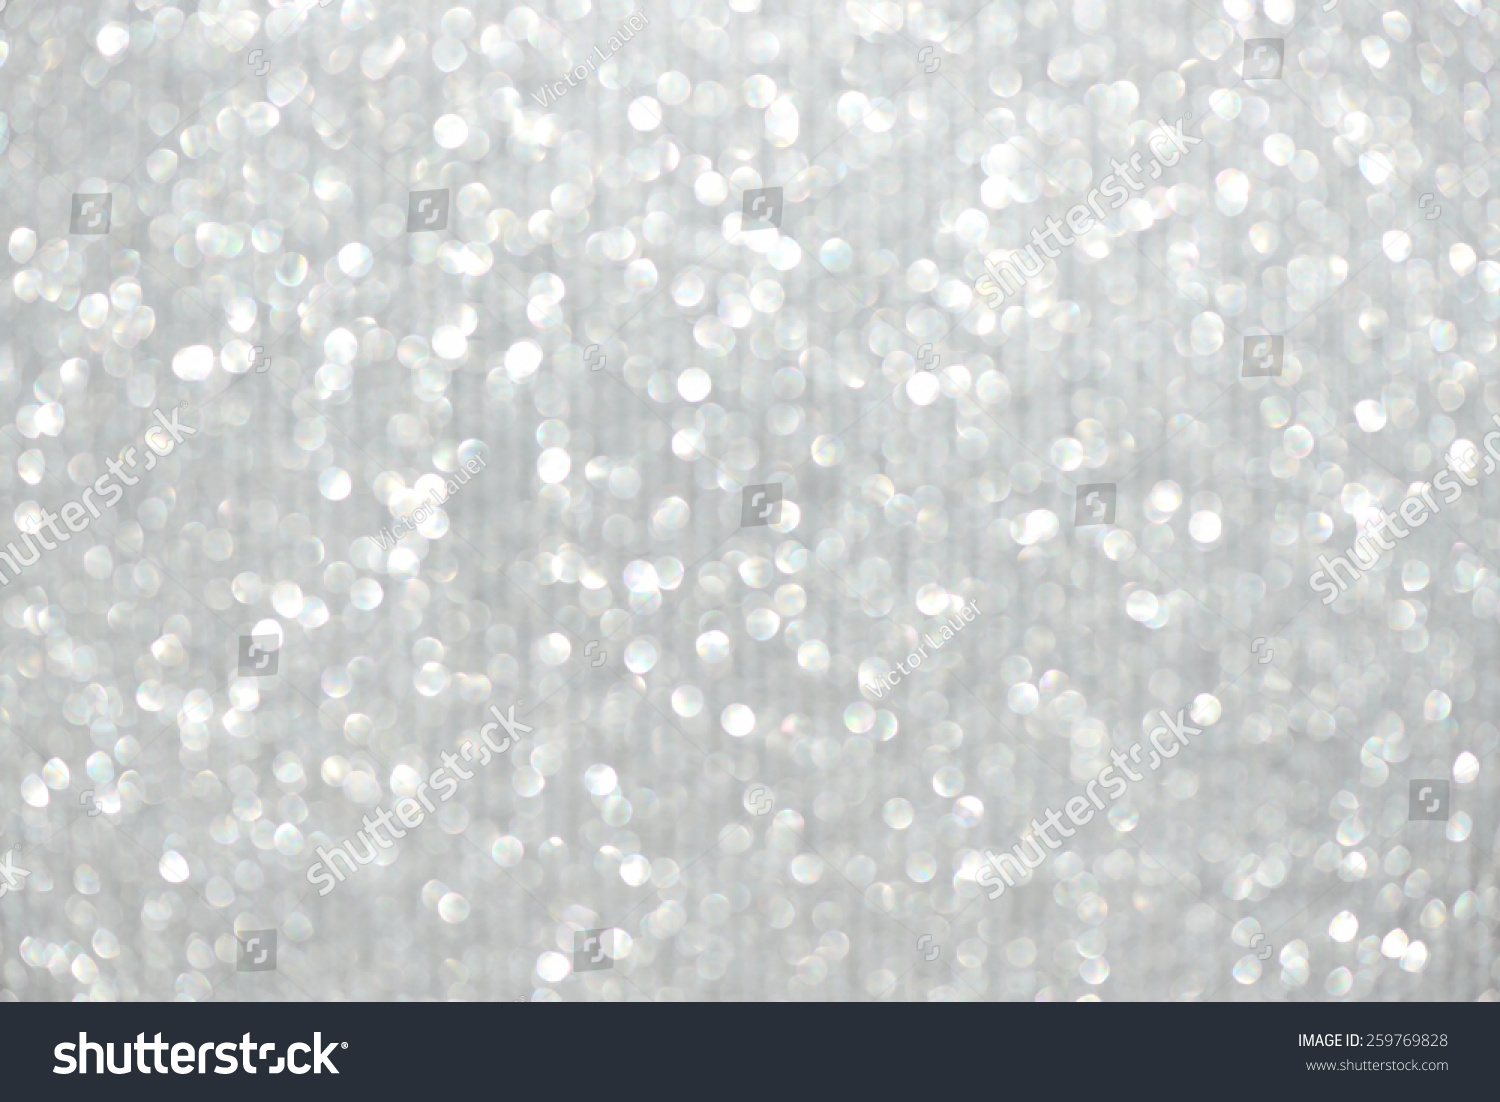 2,445 Glittery crystal background Images, Stock Photos & Vectors ...